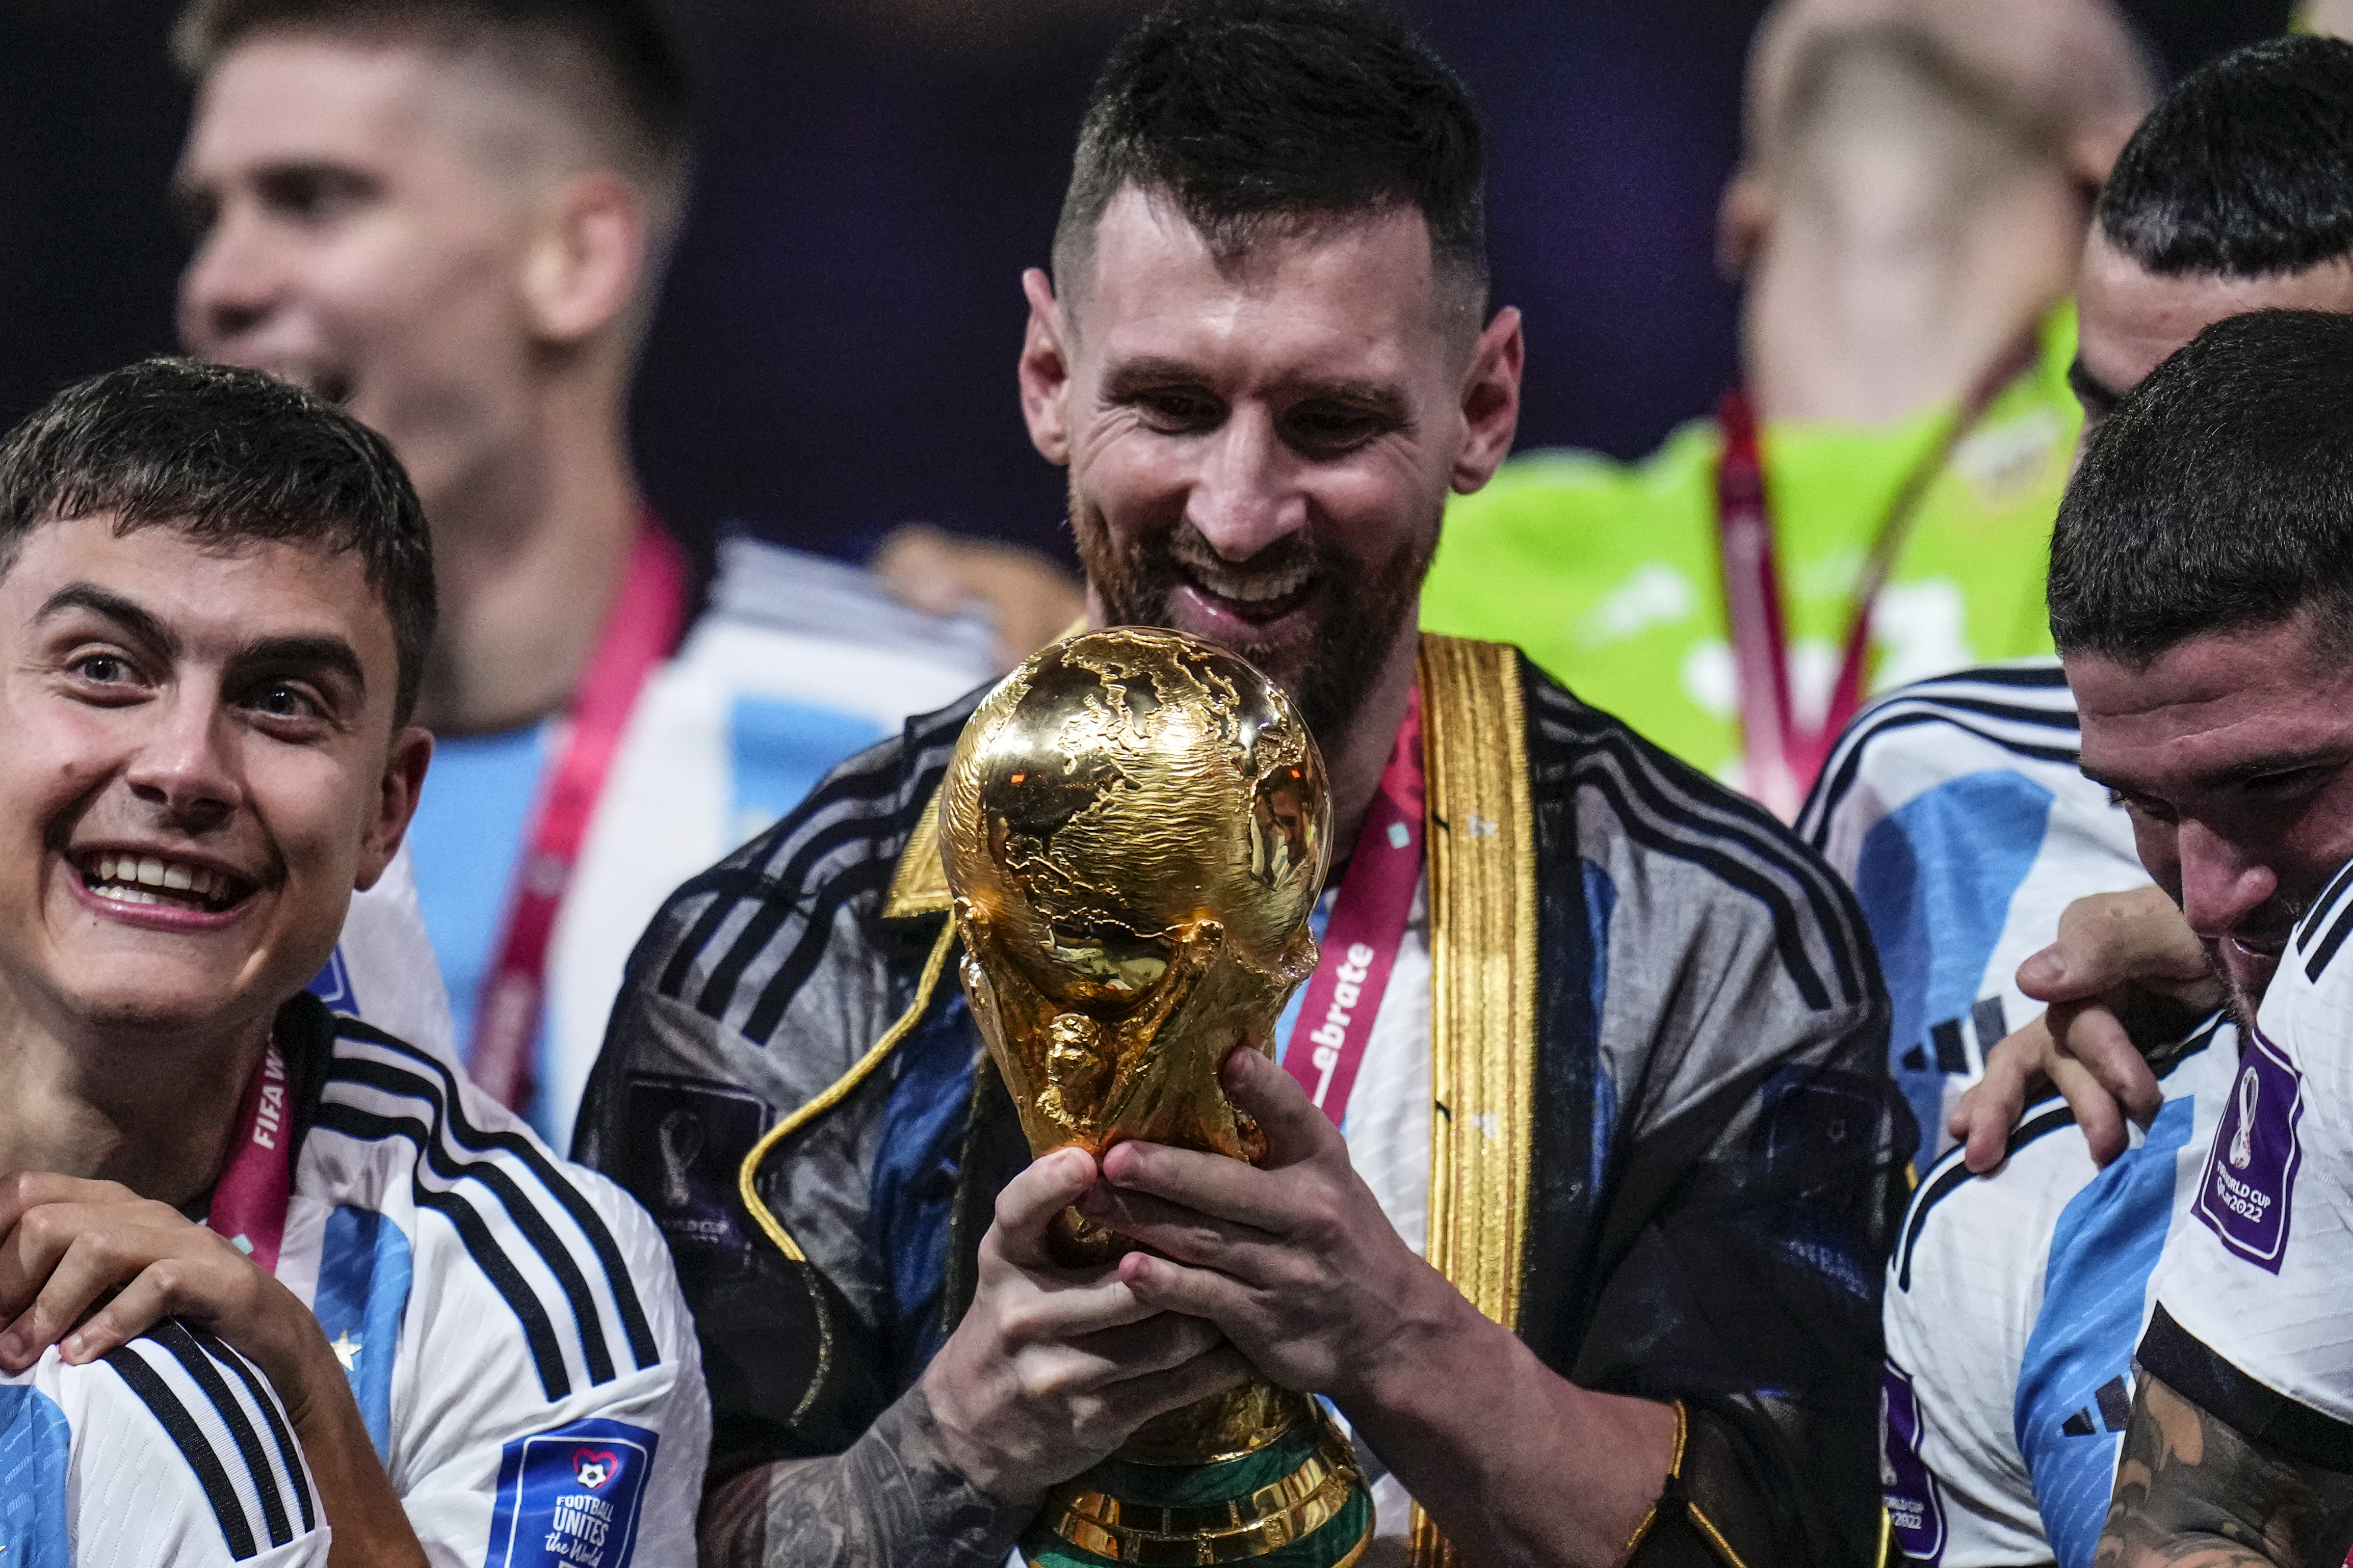 Lionel Messi wins World Cup for Argentina to push claim to be soccer's GOAT